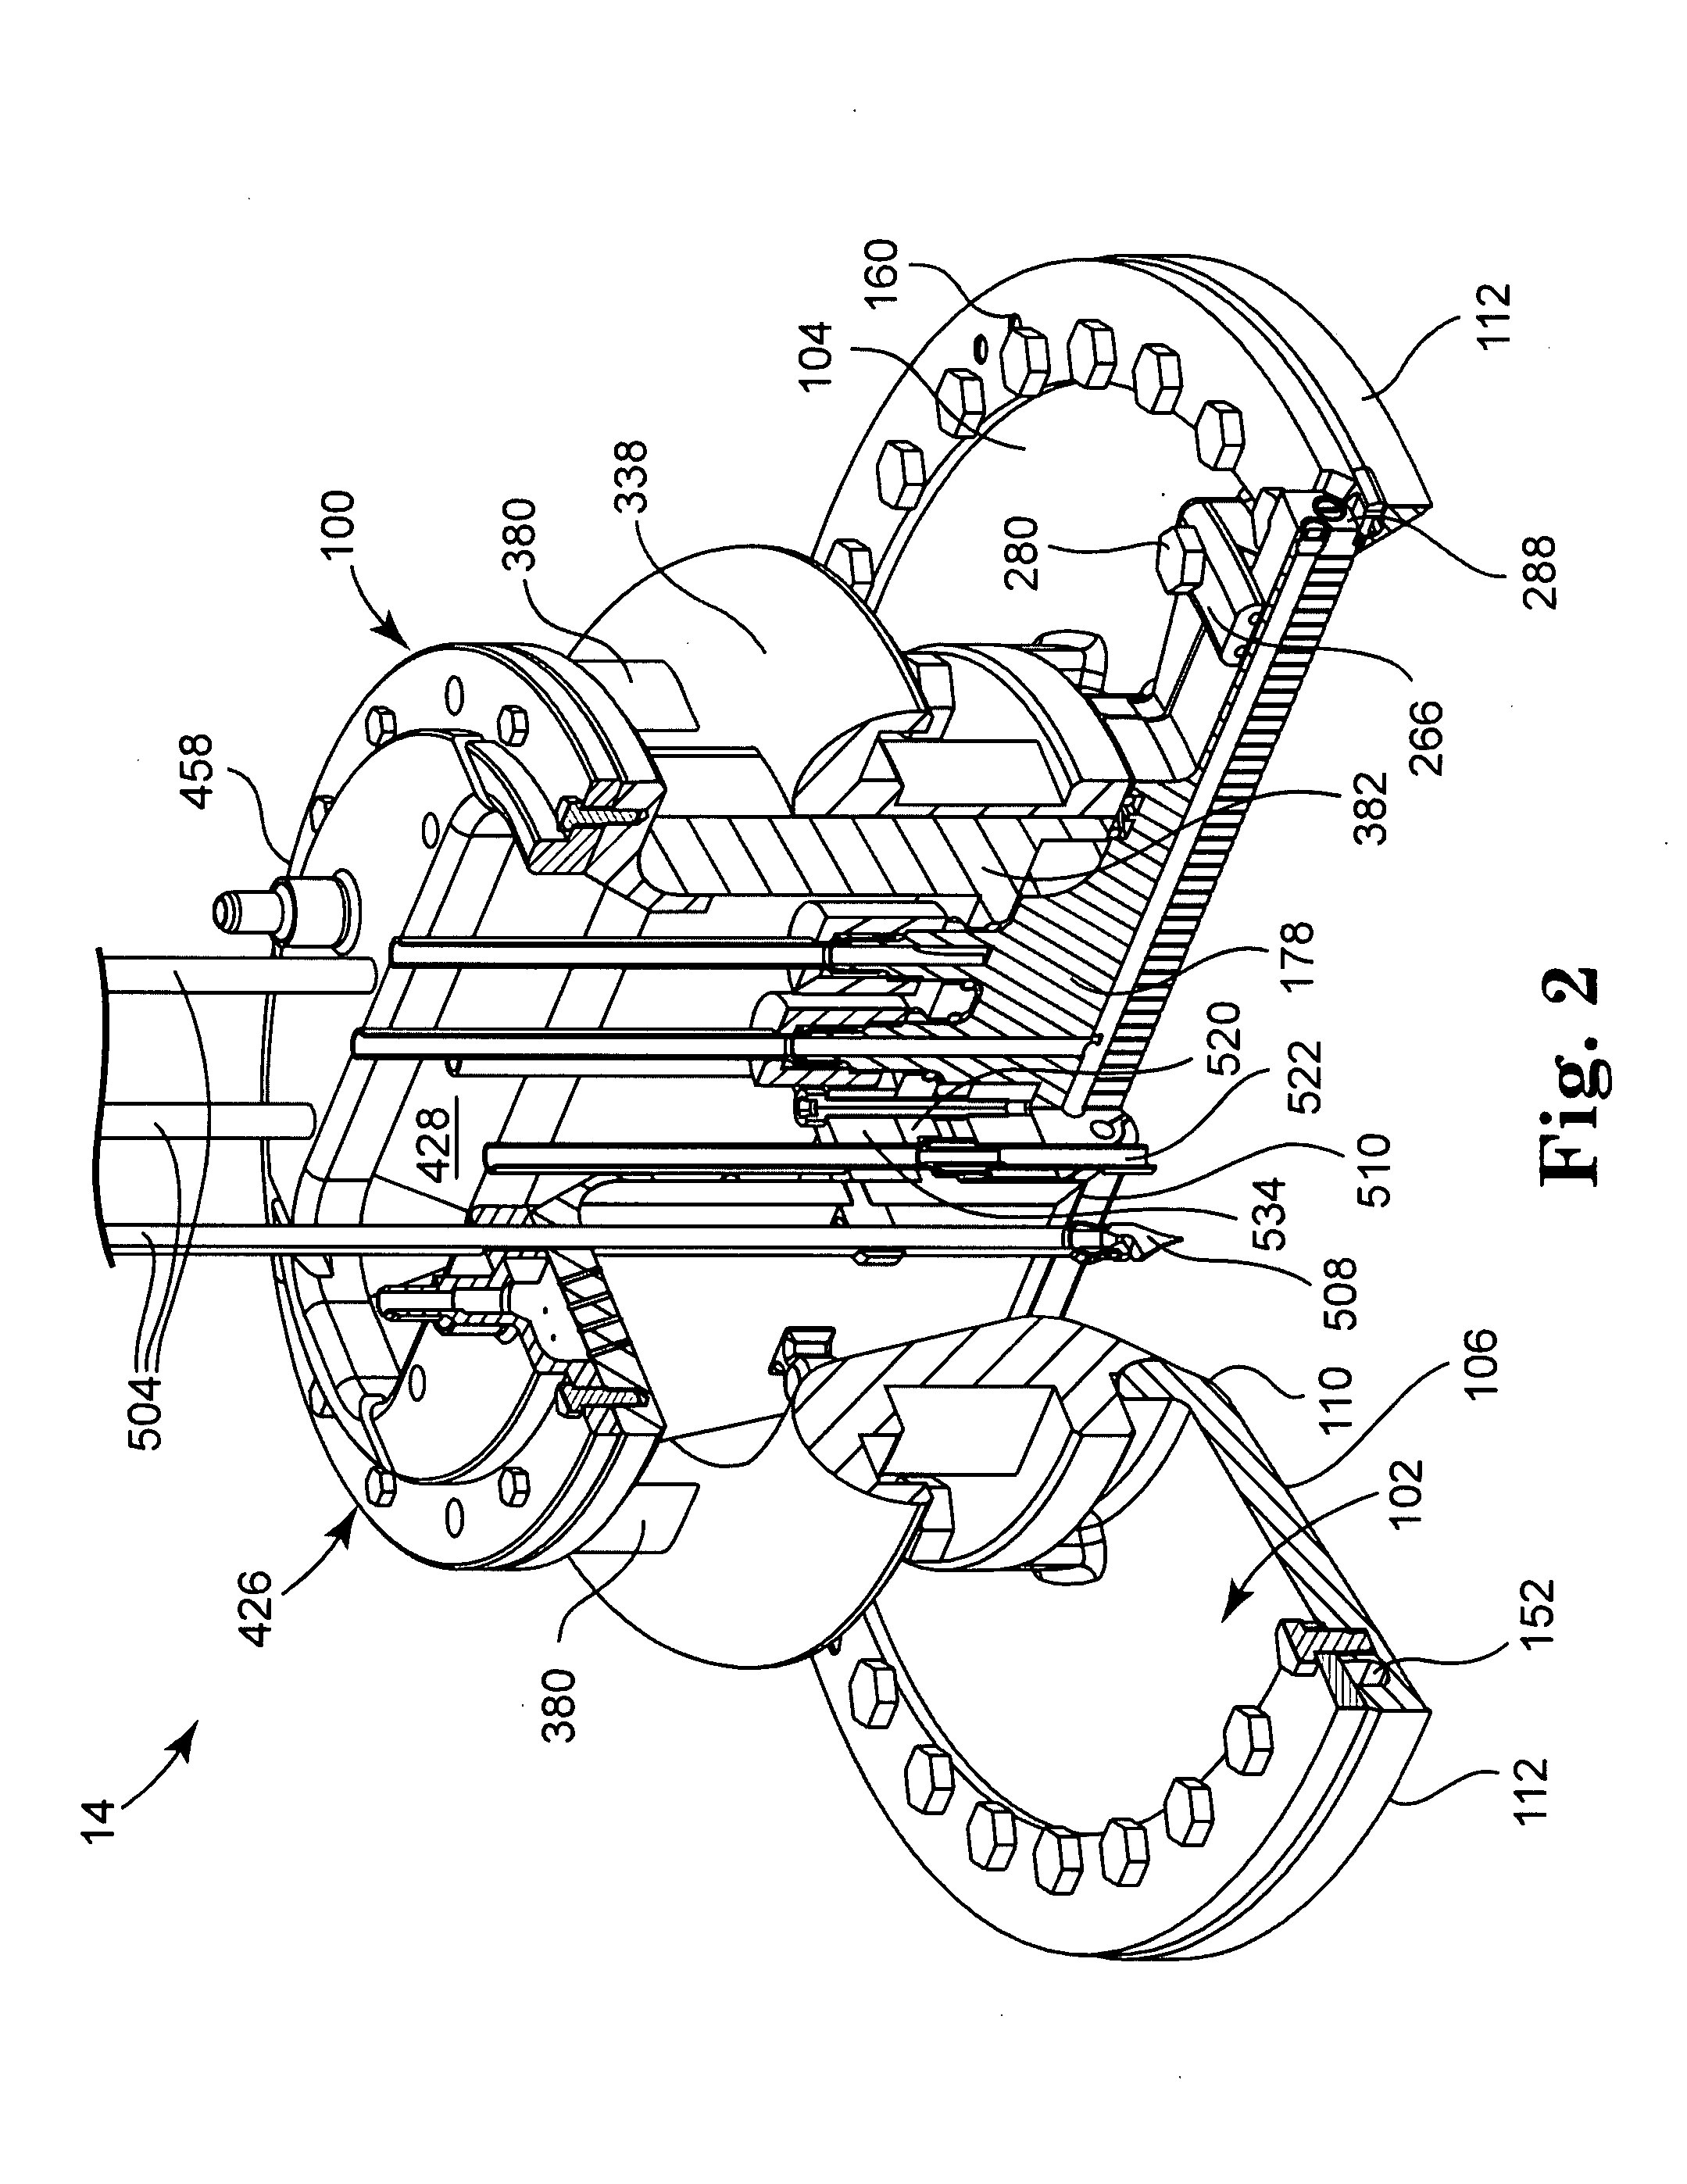 Barrier structure and nozzle device for use in tools used to process microelectronic workpieces with one or more treatment fluids